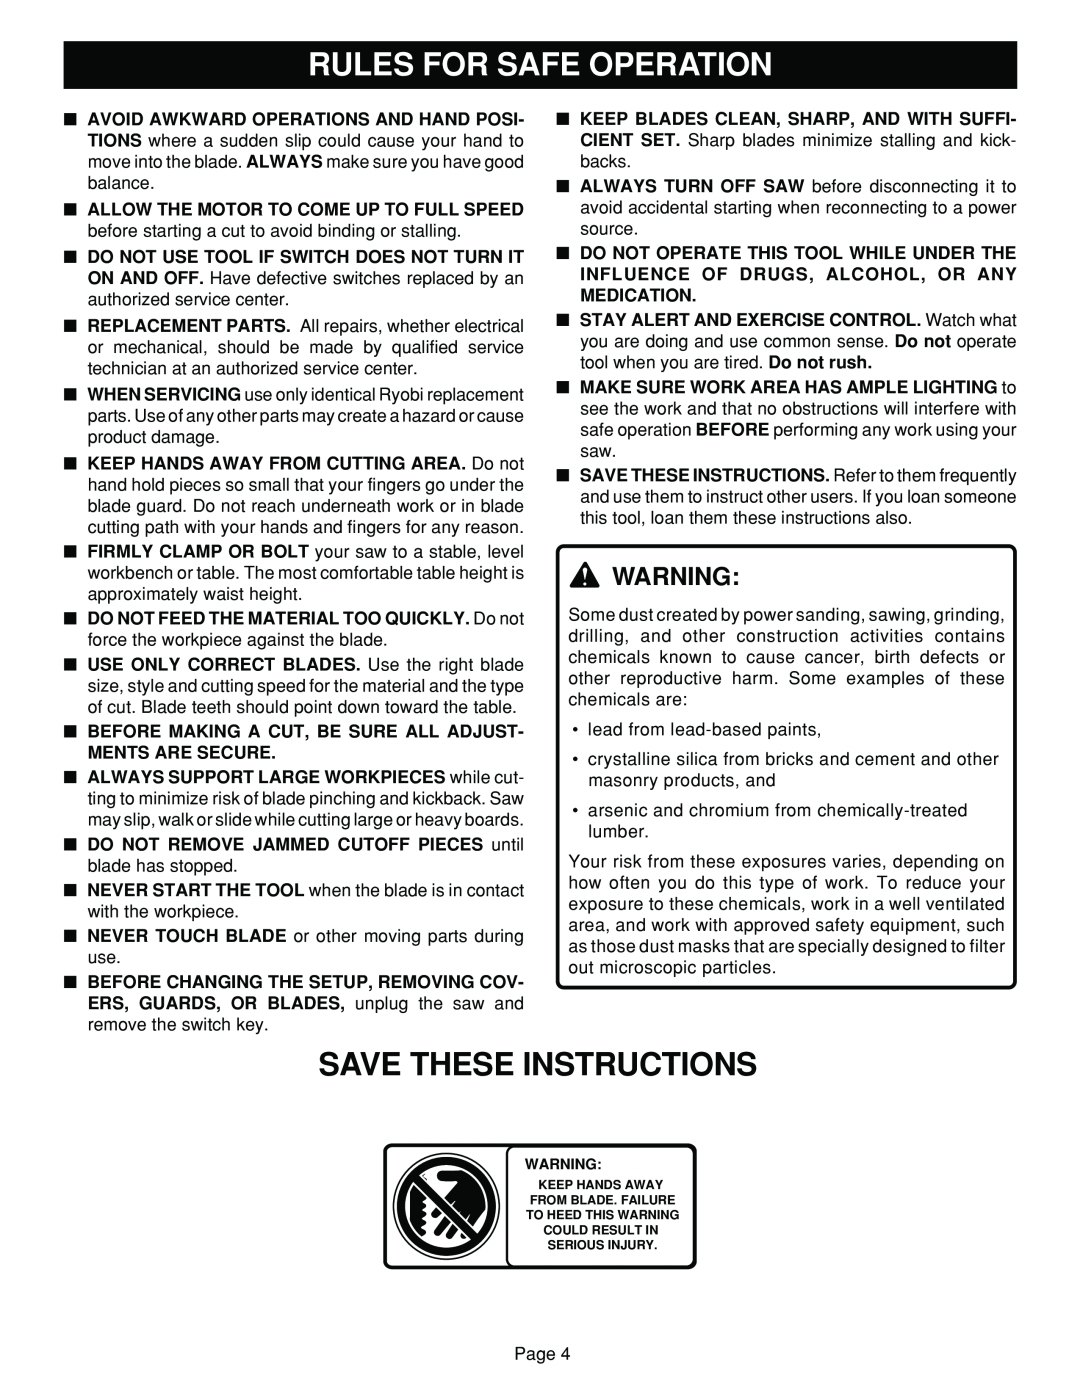 Ryobi SC180VS manual Rules For Safe Operation, Save These Instructions 